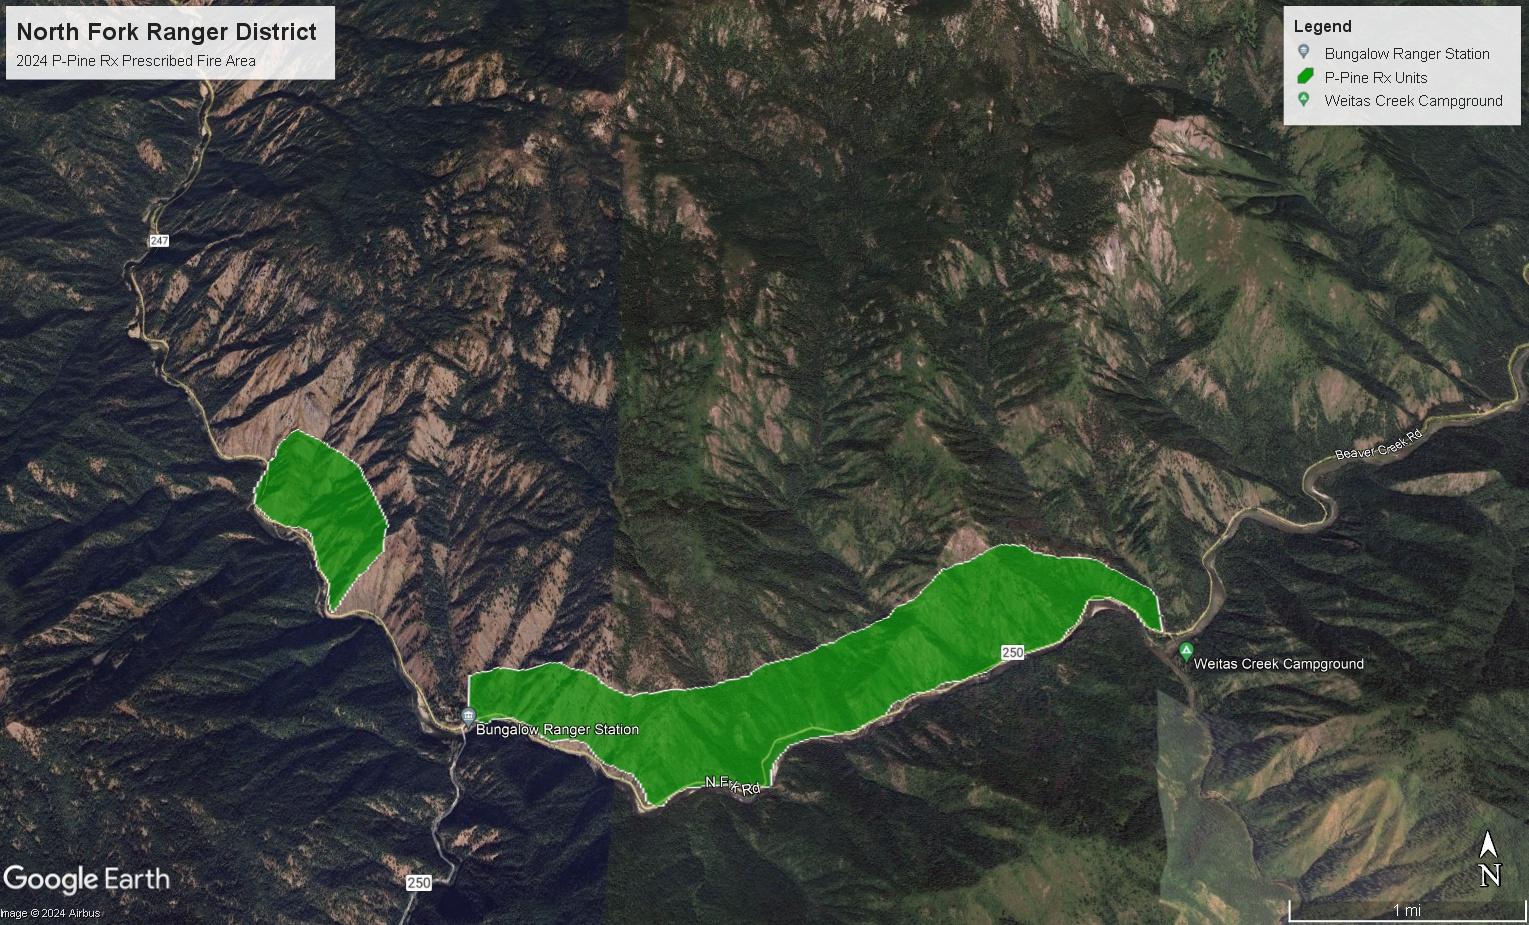 Image of satellite image map showing the prescribed burn project area between Washington Creek Campground and Cedar Campground on the North Fork District of the Nez Perce-Clearwater National Forest.